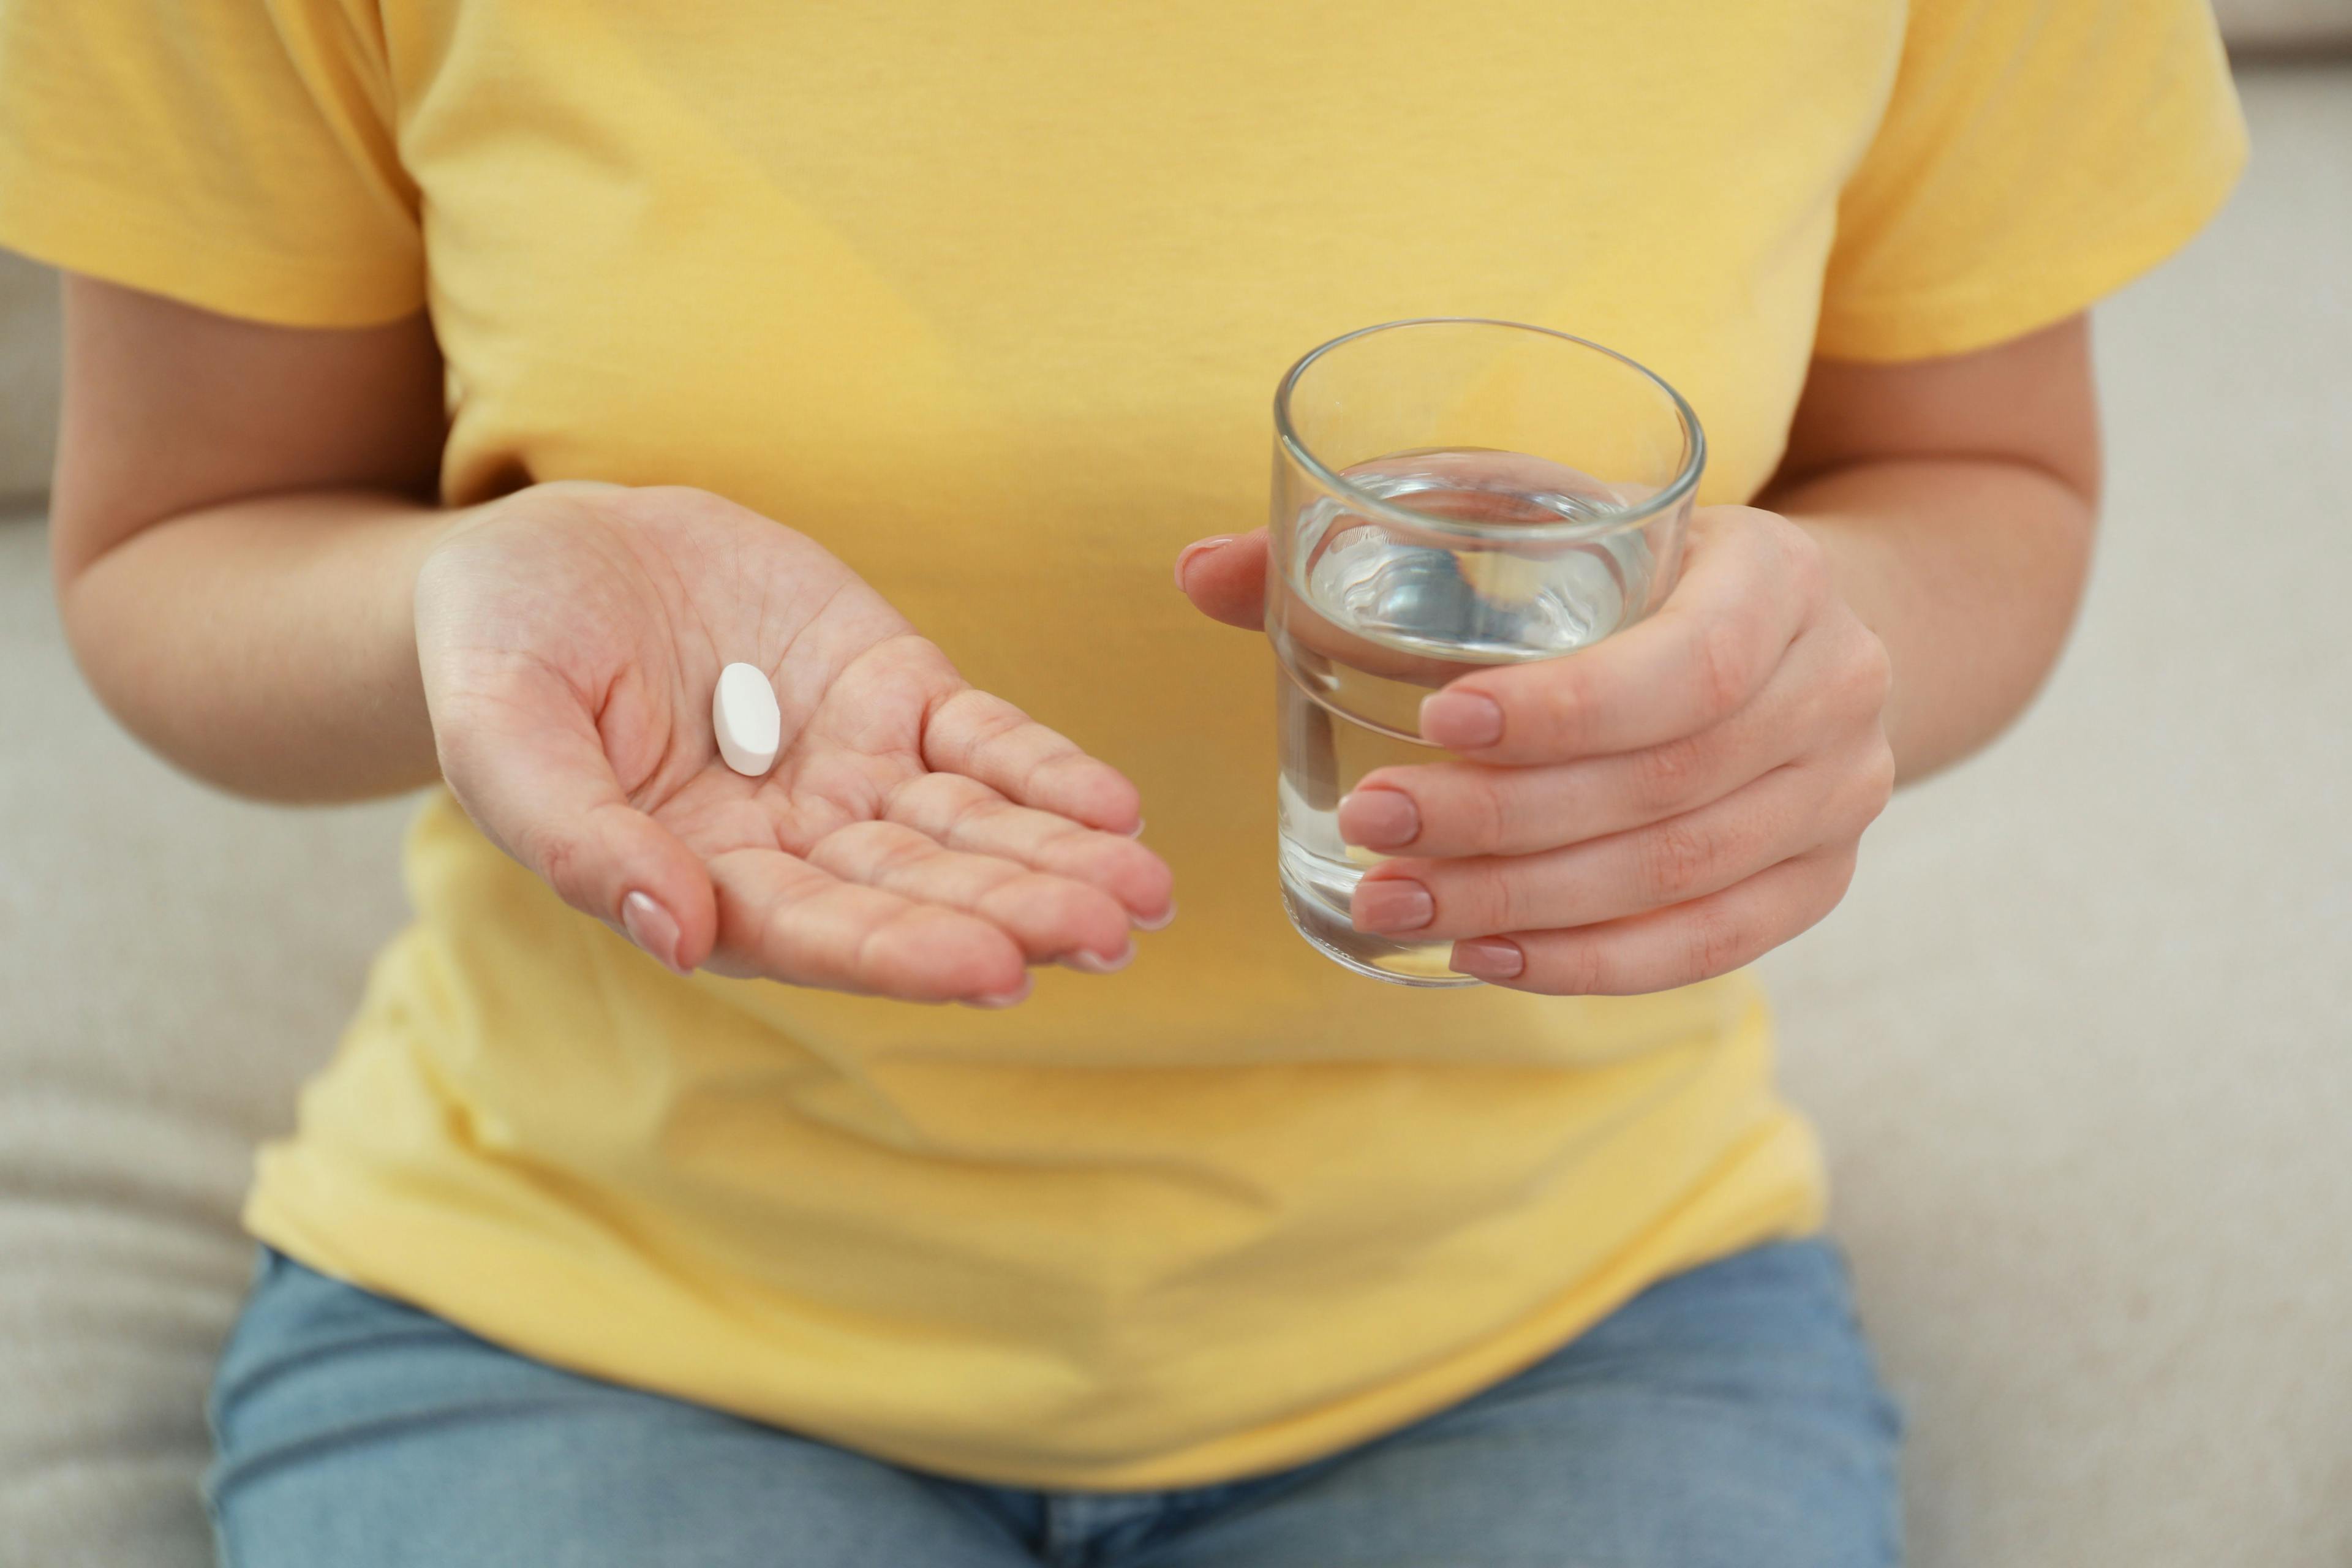 Woman holding a pill and glass of water